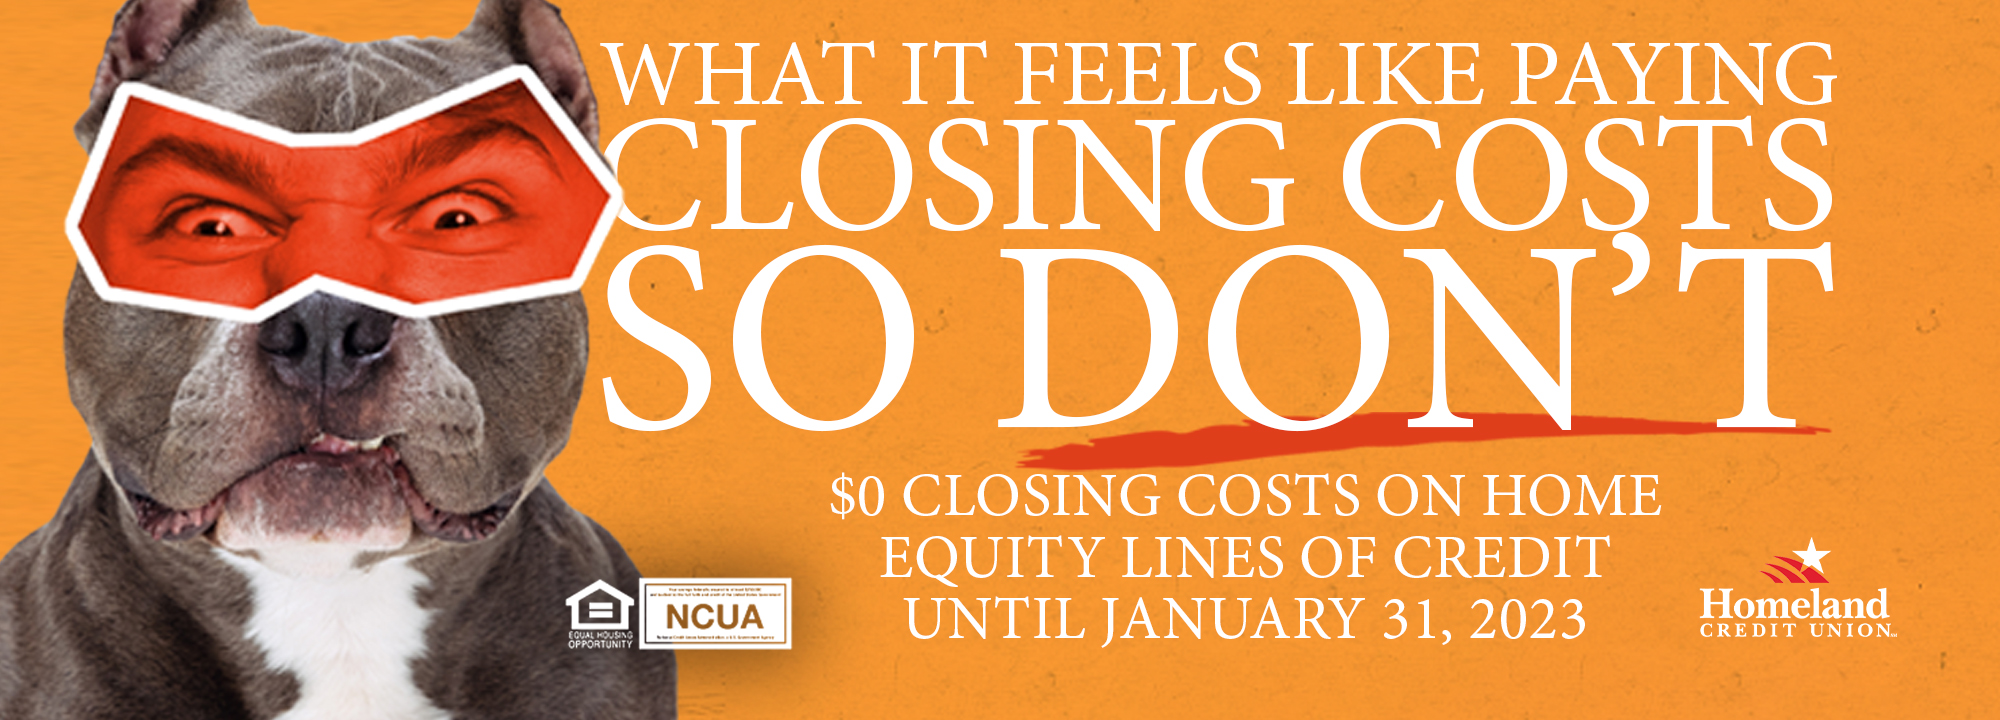 What it feels like paying closing costs so don't. $0 closing costs on home equity lines of credit union January 31, 2023.